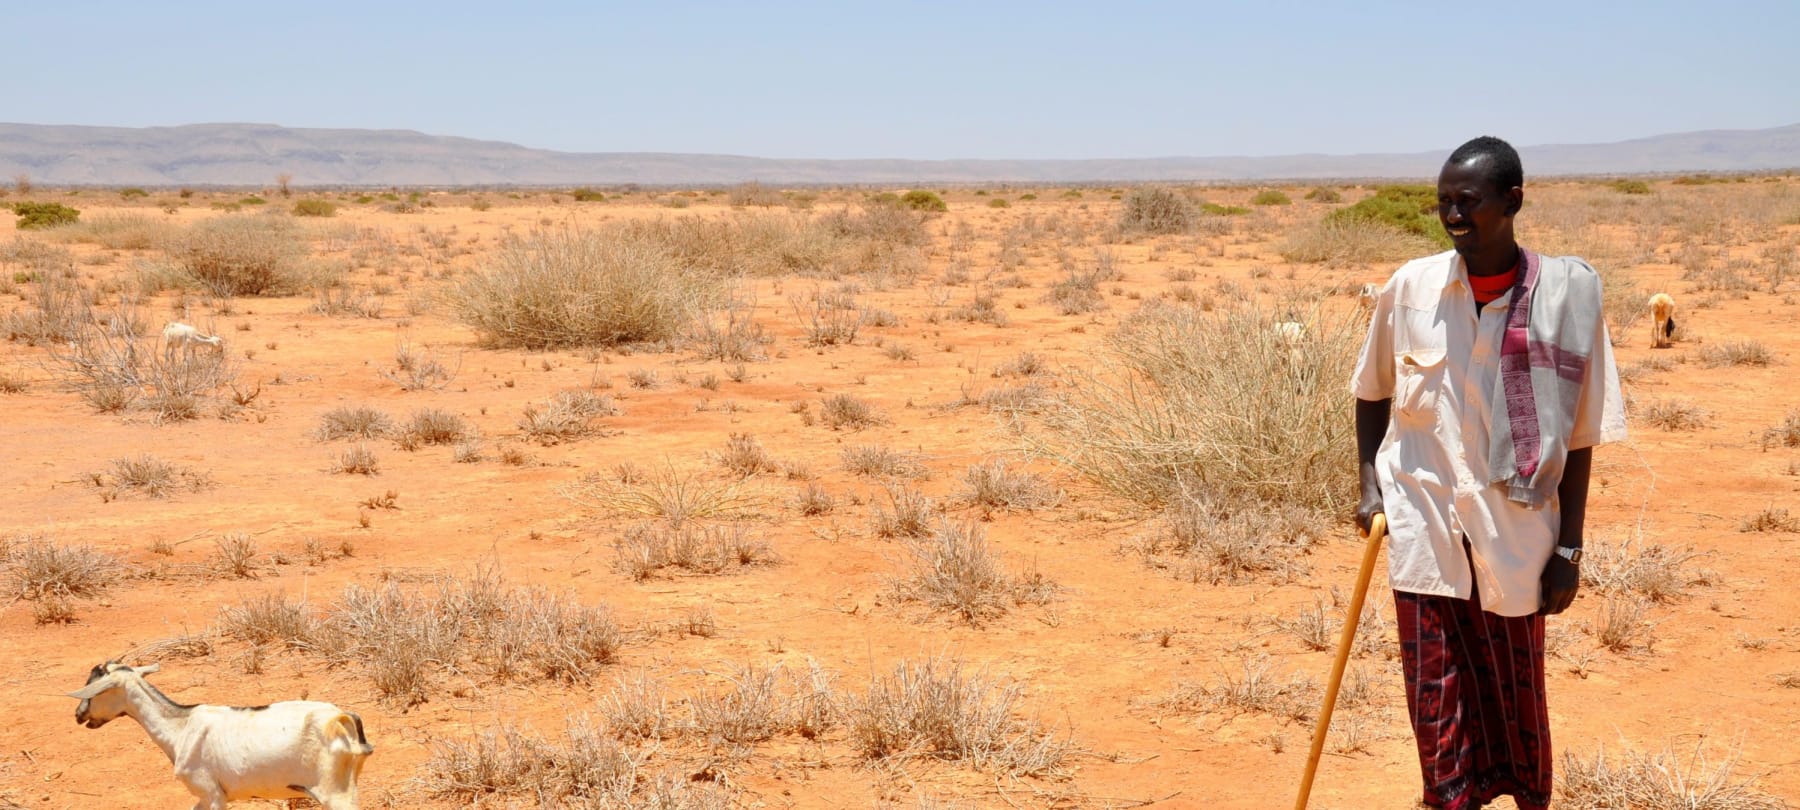 Sand dams offer a possible solution to climate change and drought in Somaliland